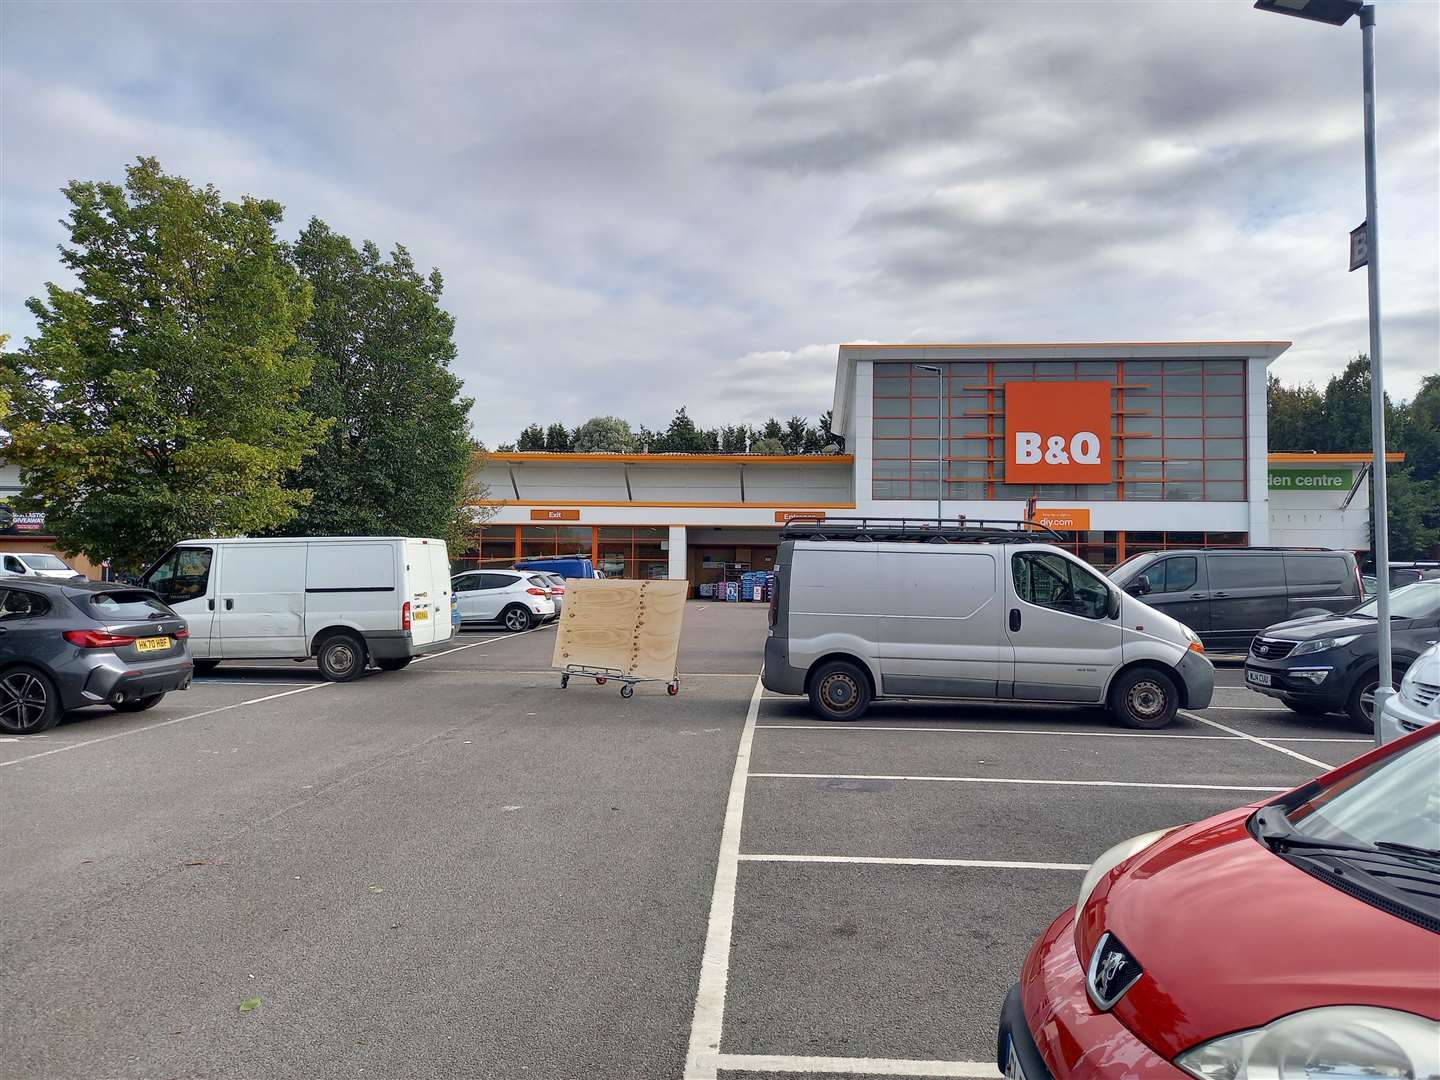 B&Q has been downsized to cater for the new Aldi